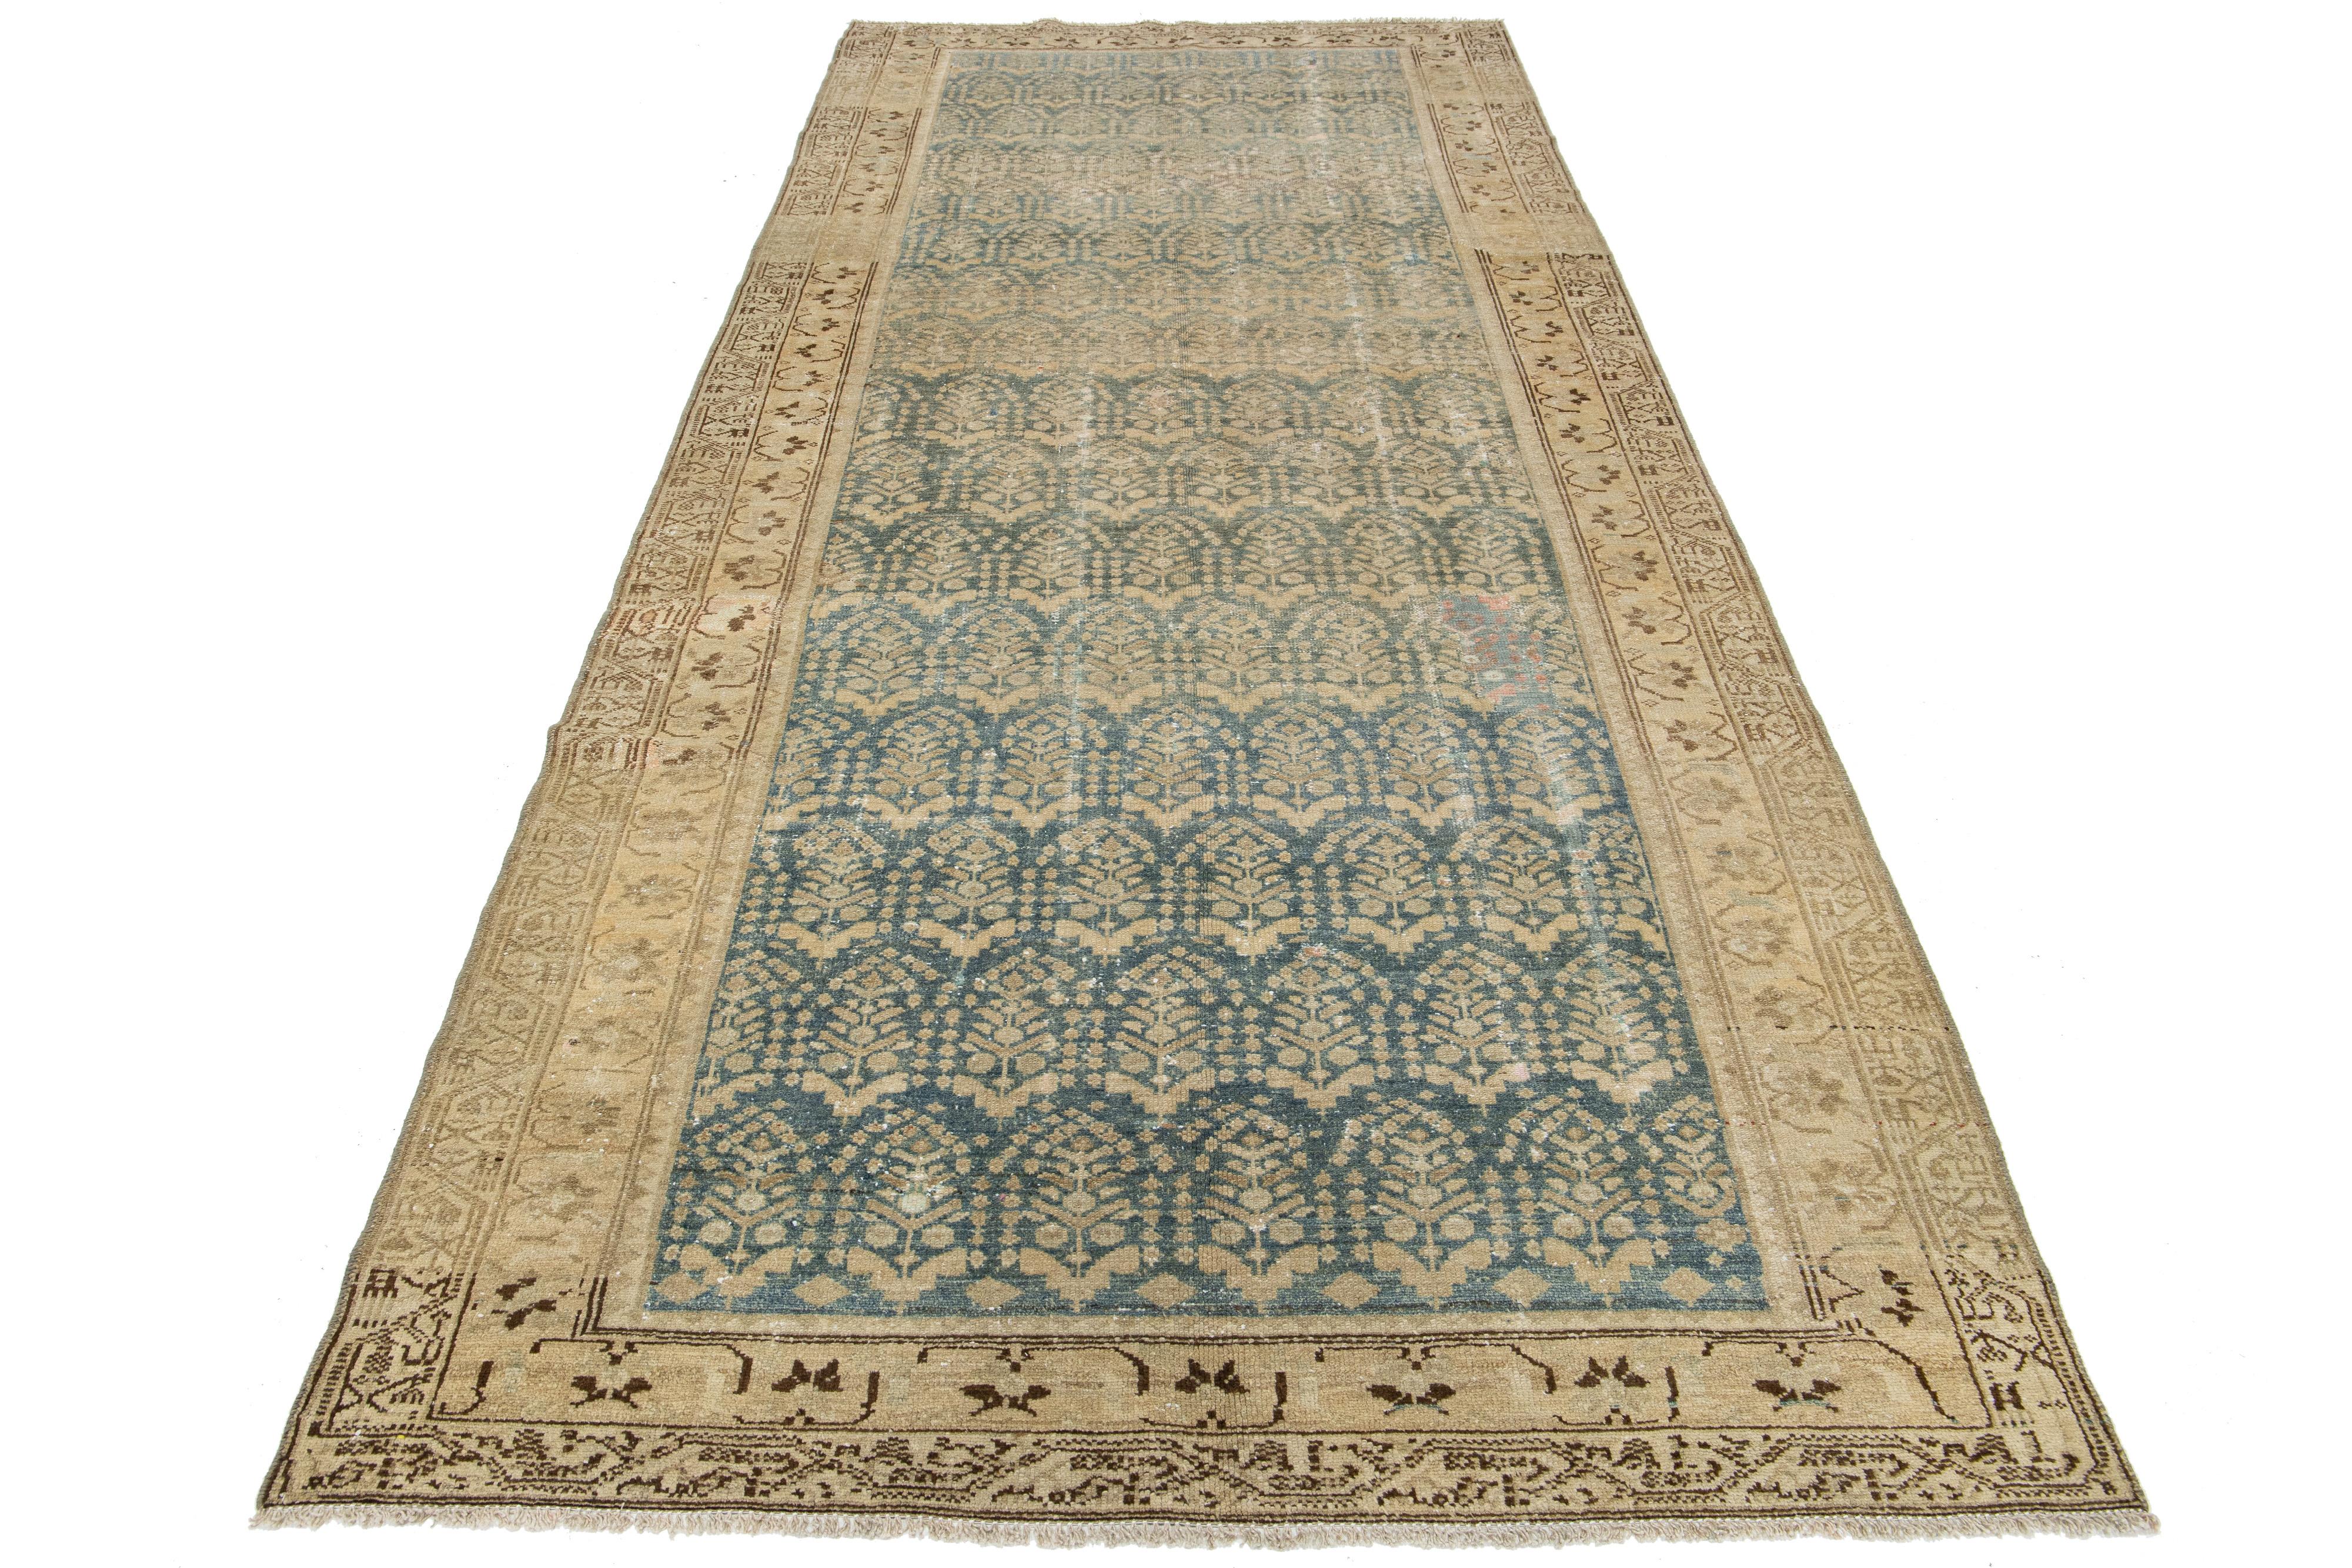 Antique 19th-century handmade Persian Malayer wool rug. This gallery-size rug has a blue field with beige and brown accents all over the design.

This rug measures 5'2